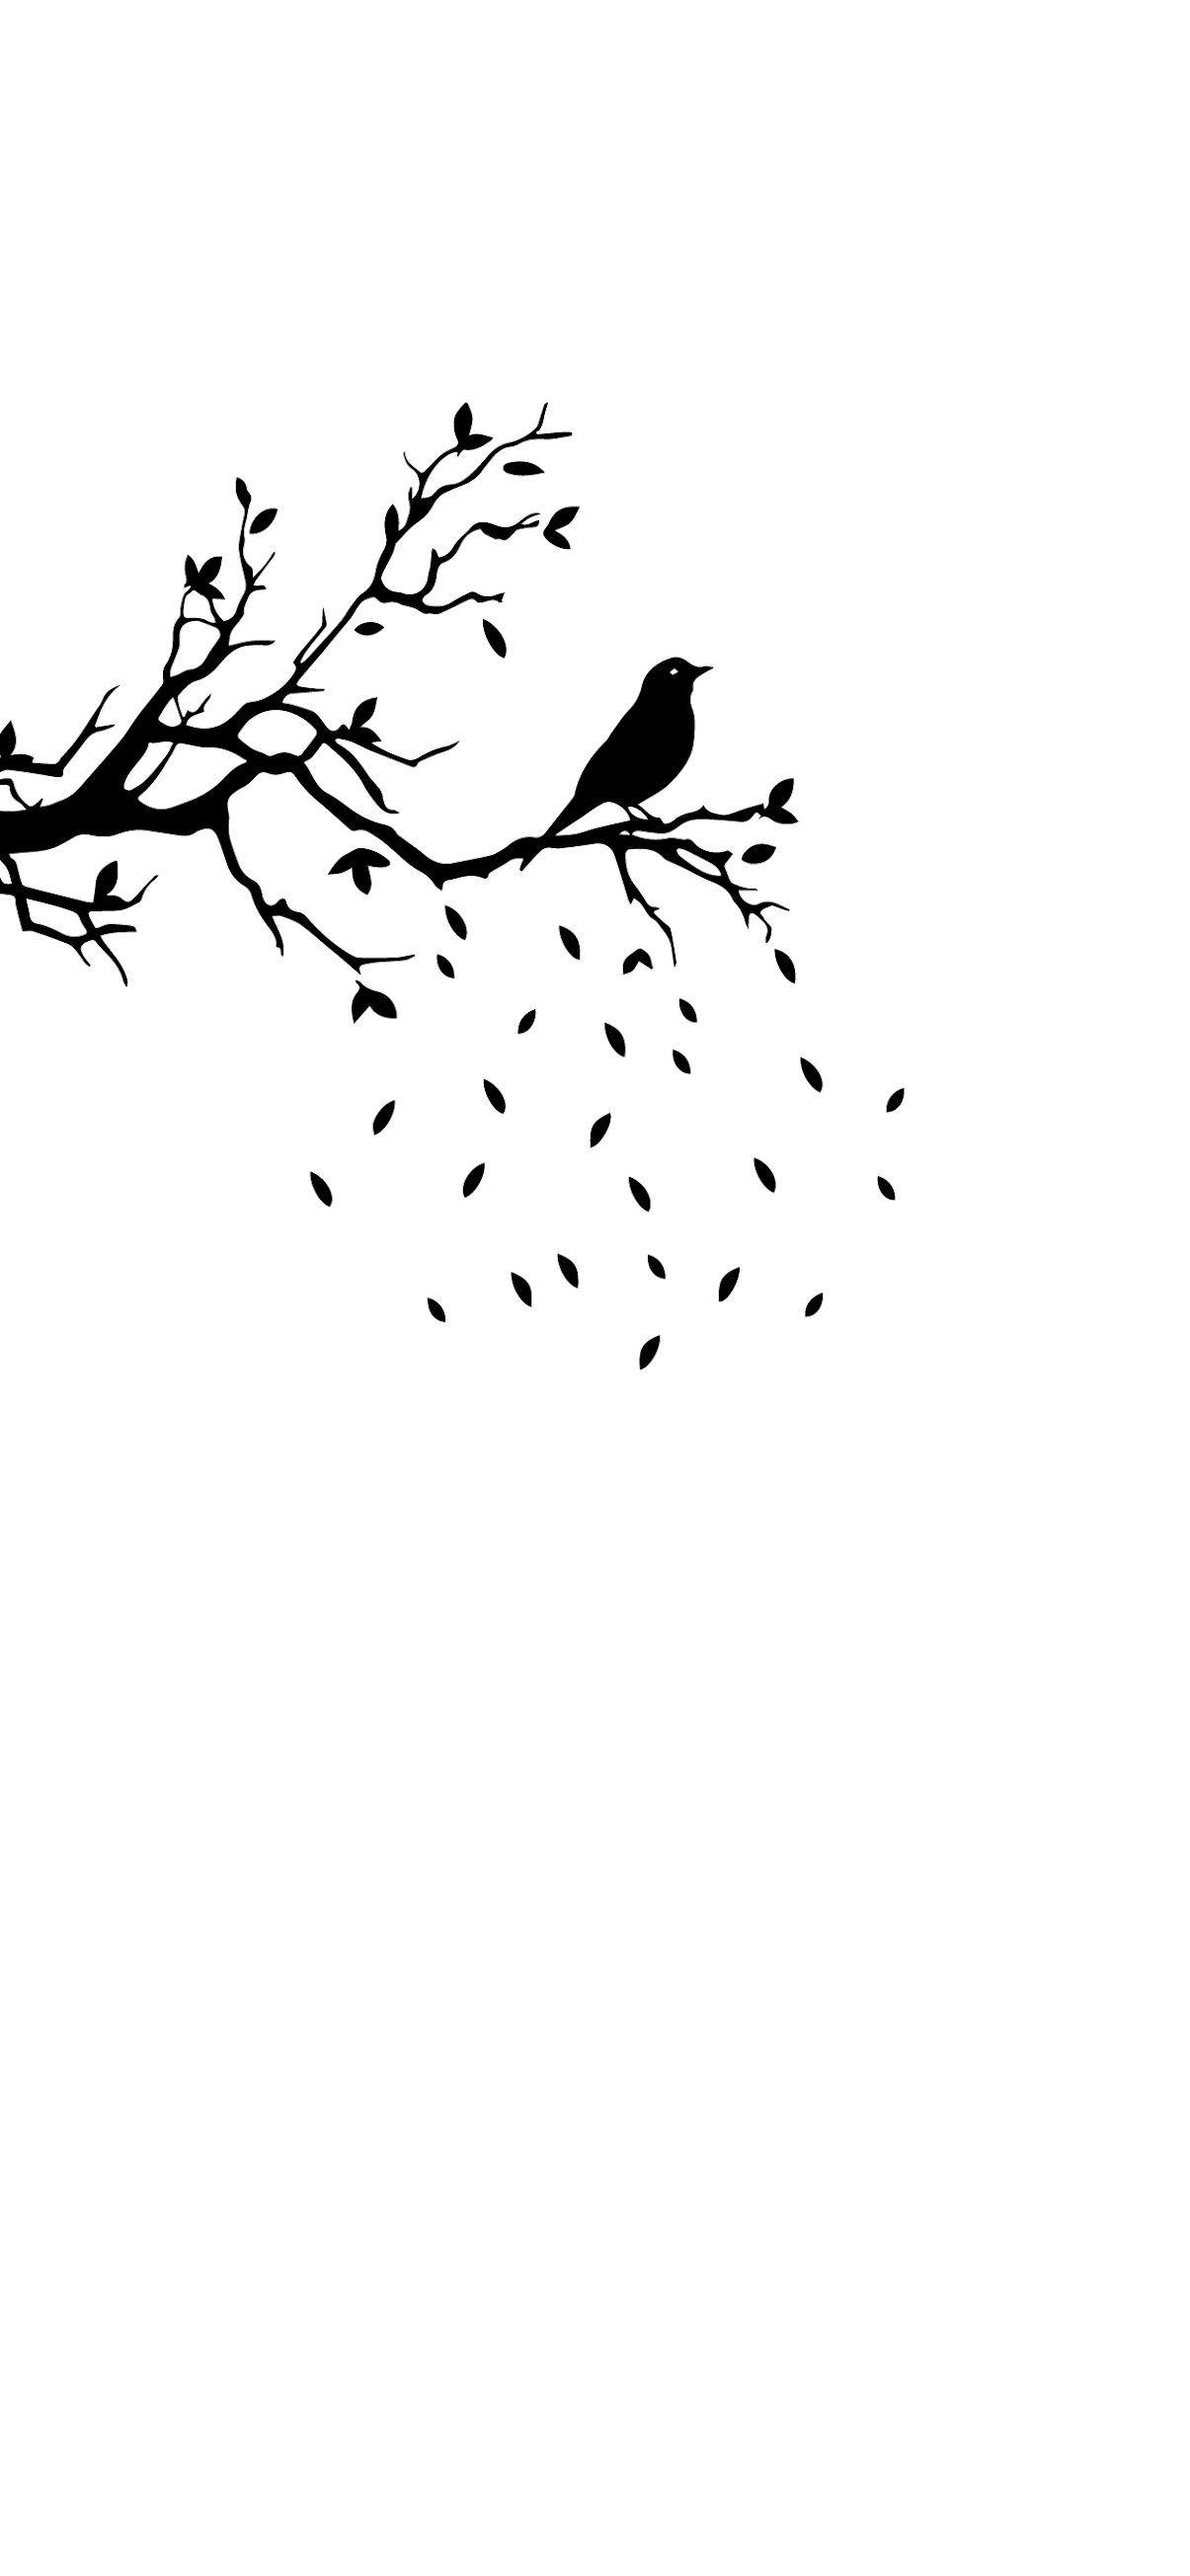 Black and white image of a bird on a tree branch with leaves falling - Clean